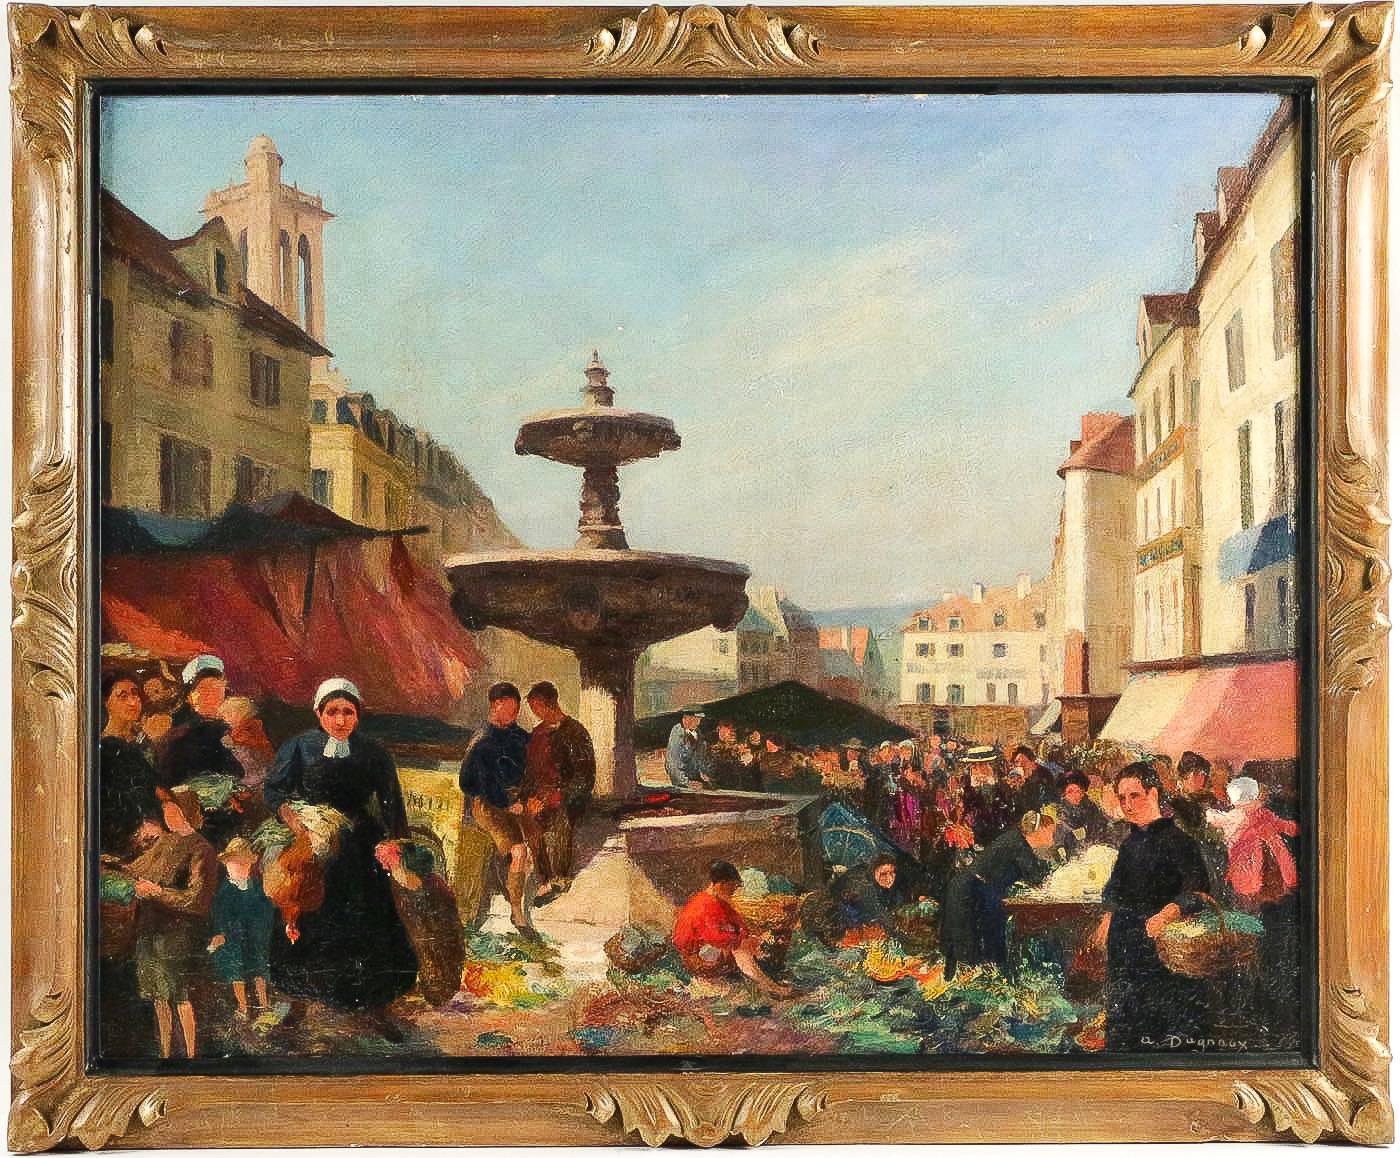 A beautiful and decorative oil on canvas, depicting a market scene on the City Hall Place in the city of Mantes-la Jolie closed to Paris, circa 1900. Impressive work on the colors which makes this painting very warm.

Our painting is in fine